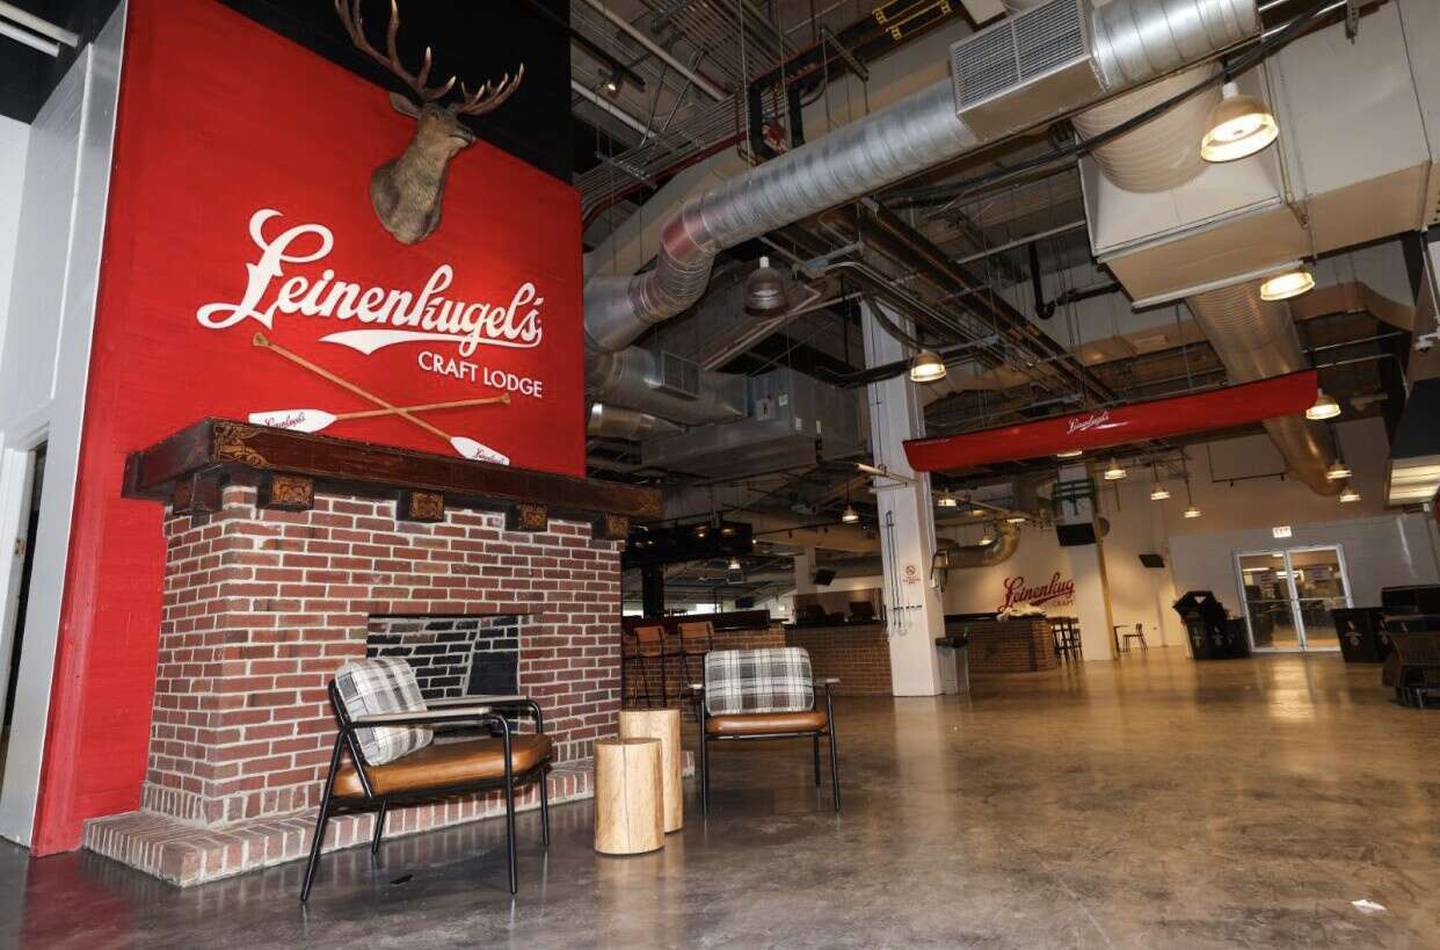 The Leinenkugel's Craft Lounge at Guaranteed Rate Field will feature more than 50 craft beers.